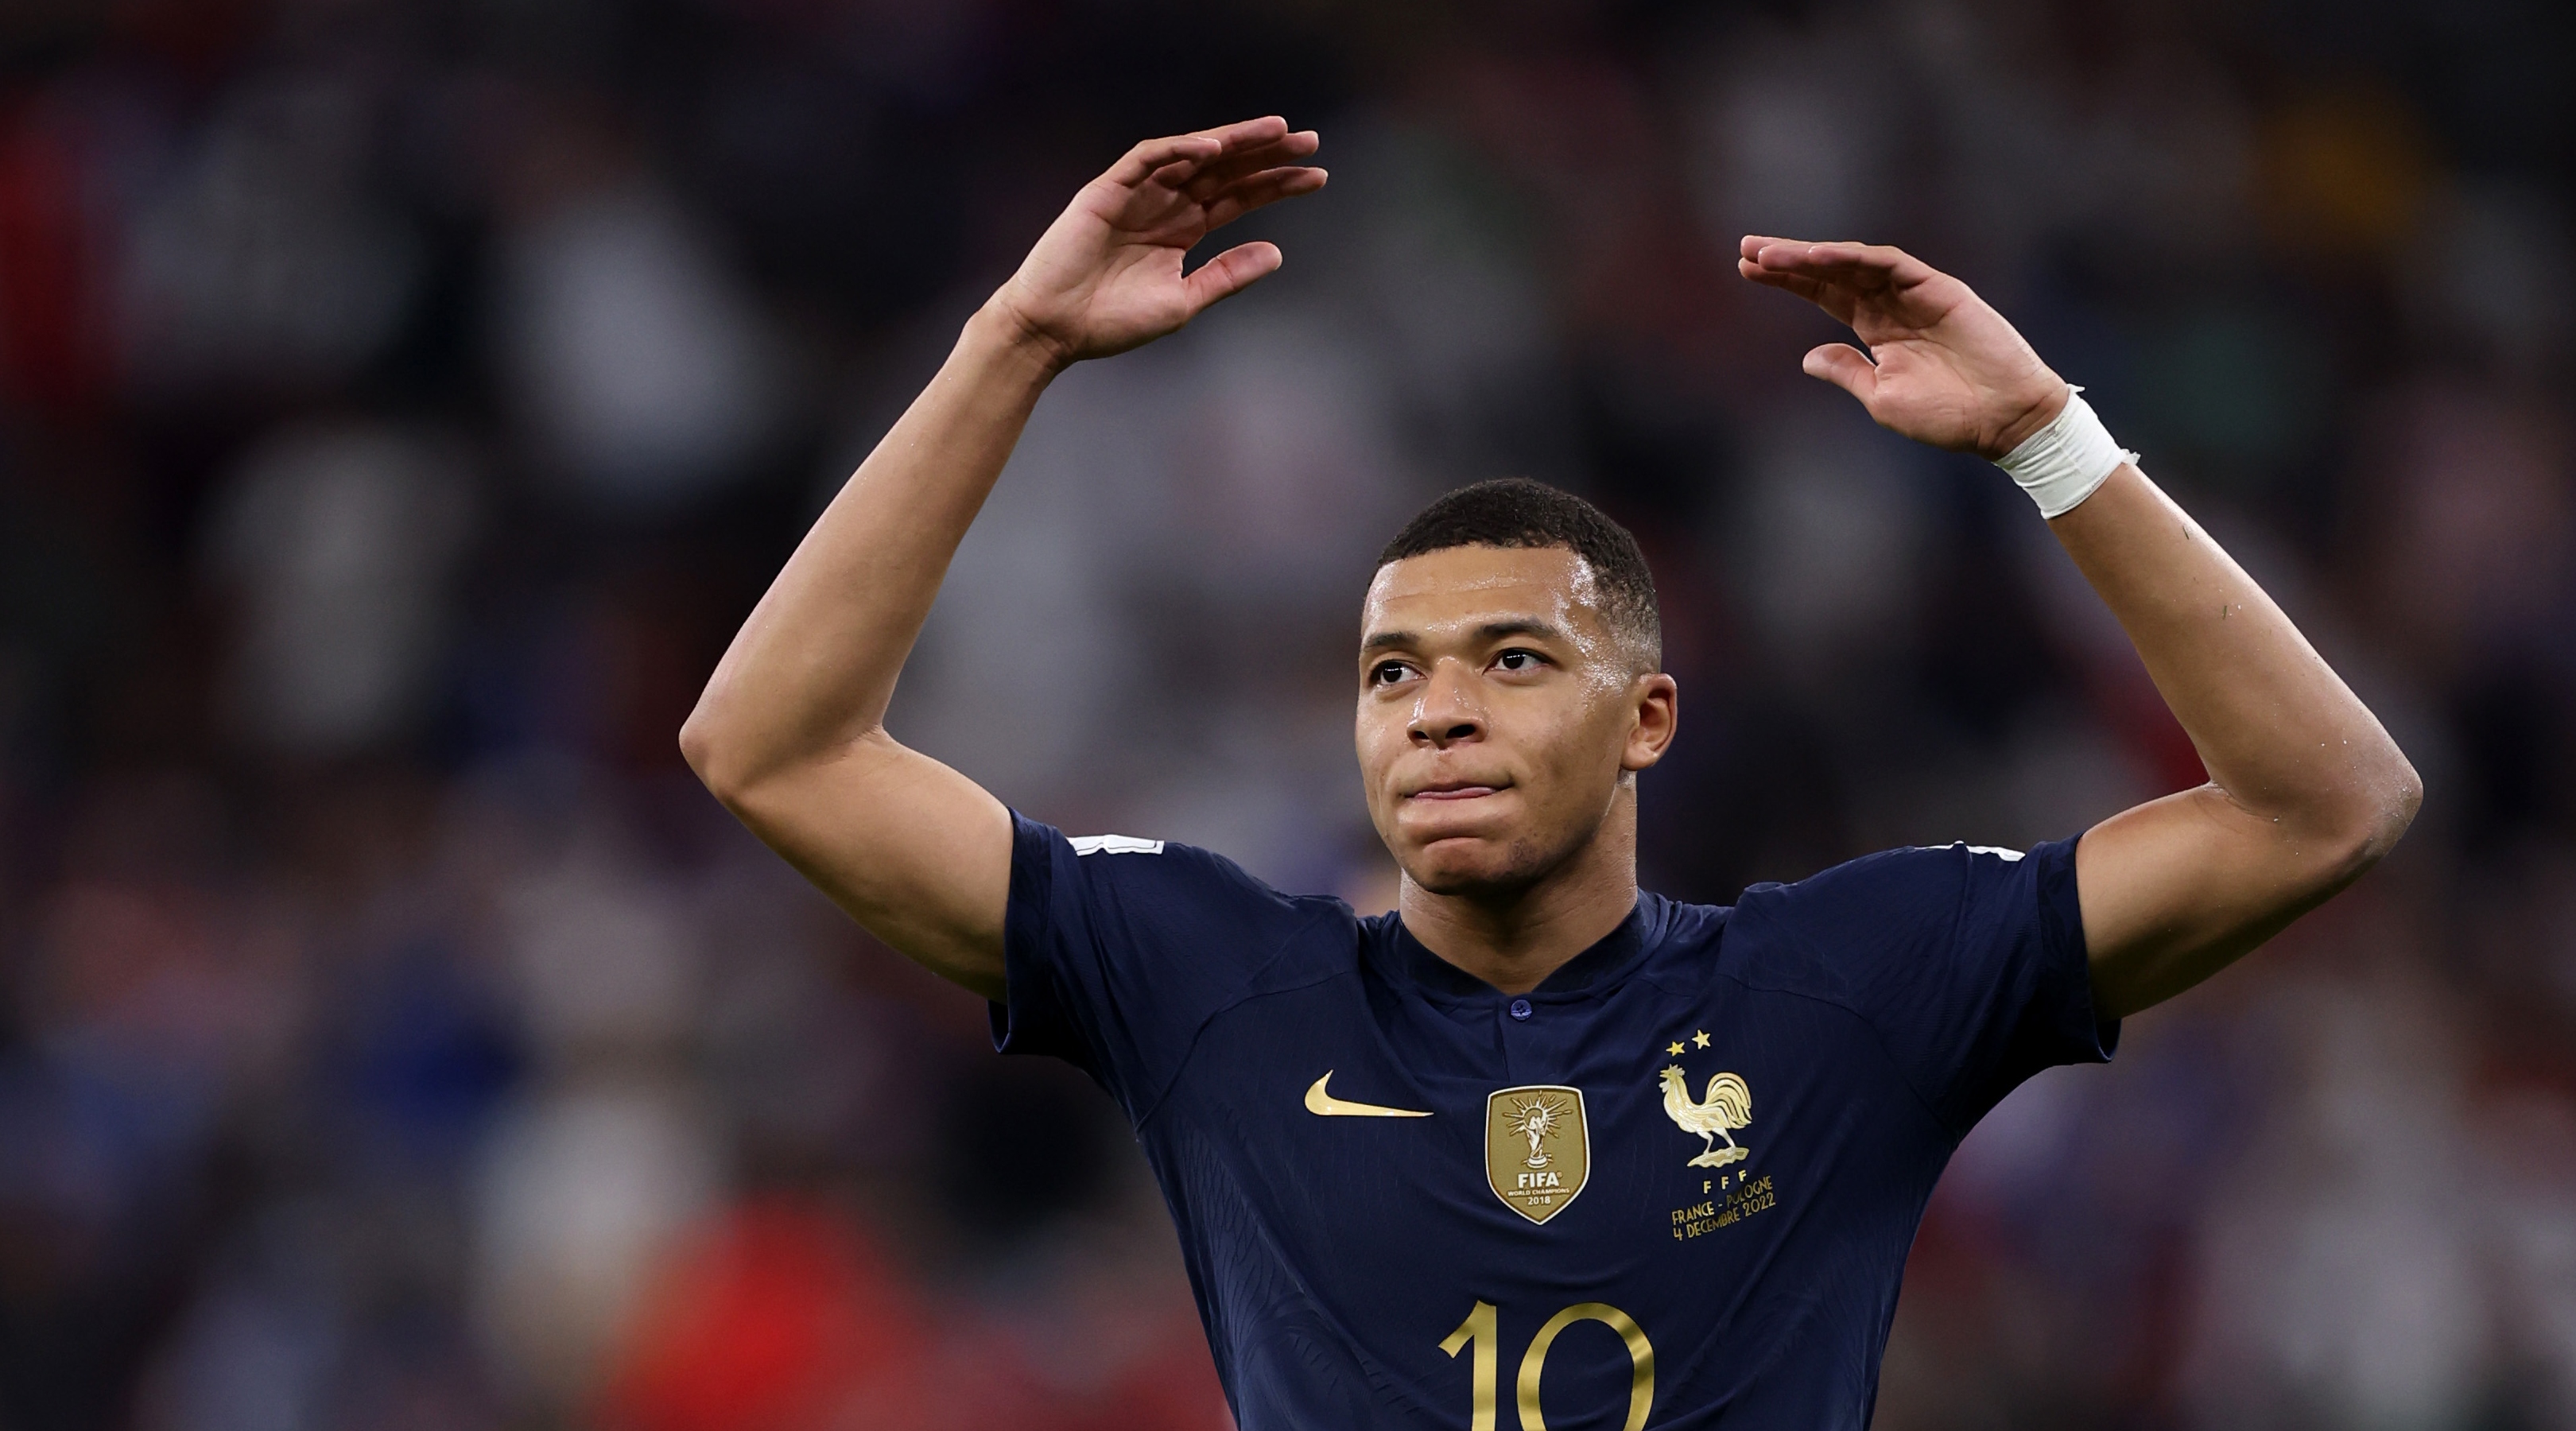 Kylian Mbappé of France celebrates after scoring the team's third goal during the FIFA World Cup Qatar 2022 Round of 16 match between France and Poland at Al Thumama Stadium on December 4, 2022 in Doha, Qatar.